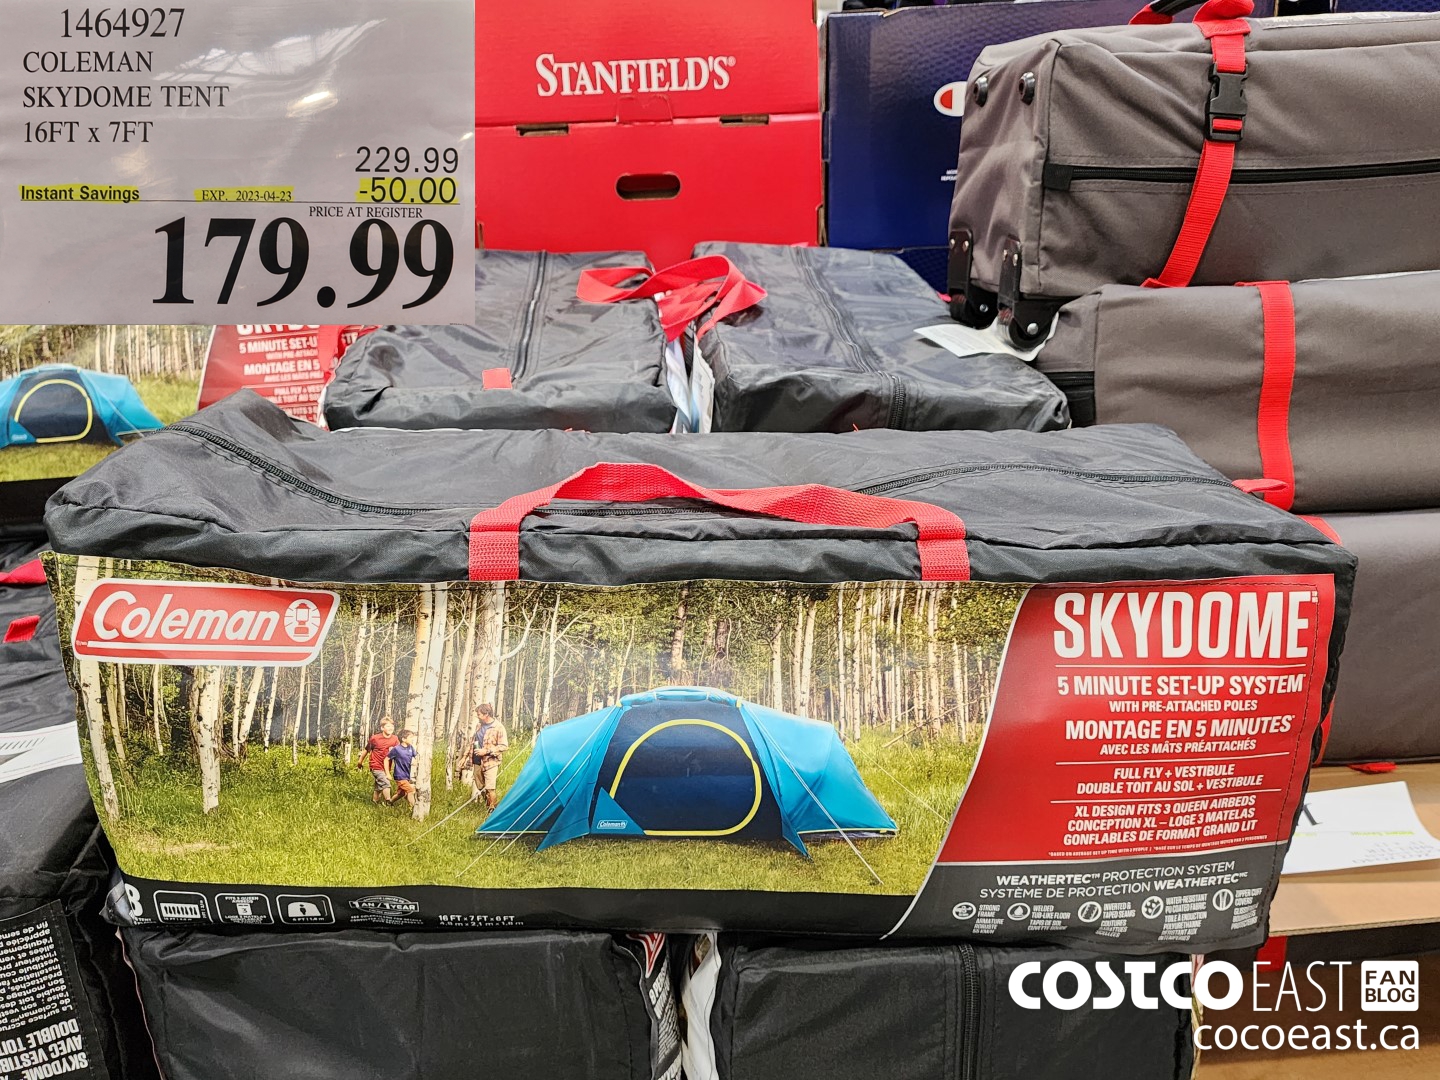 1464927 COLEMAN SKYDOME TENT 16FT X 7FT 50 00 INSTANT SAVINGS